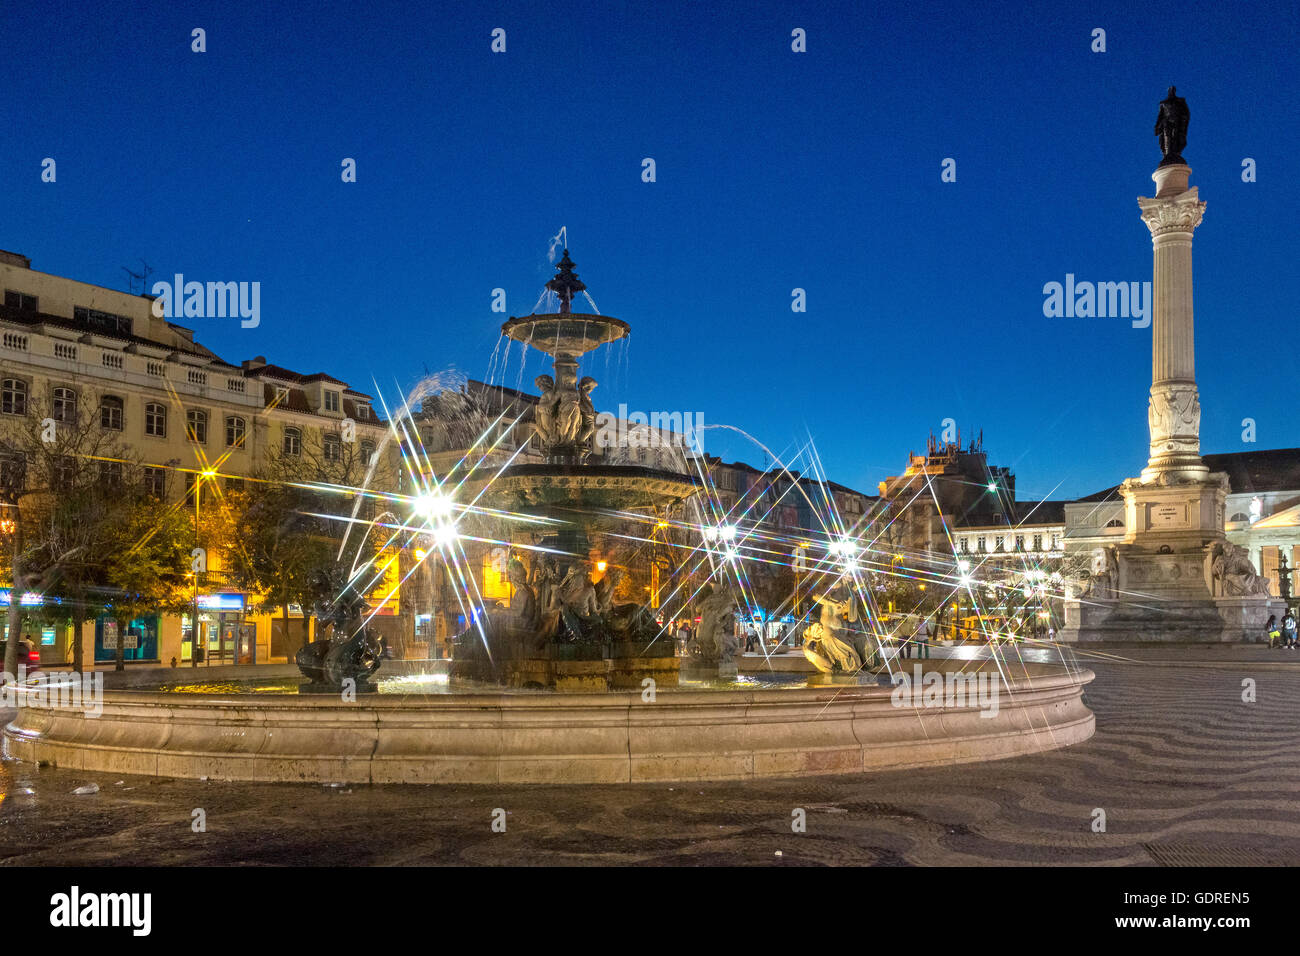 Fountain, Monument, Rossio Square, paving stones in waveform, wave pattern, night scene, blue hour, Lisbon, District of Lisbon, Stock Photo